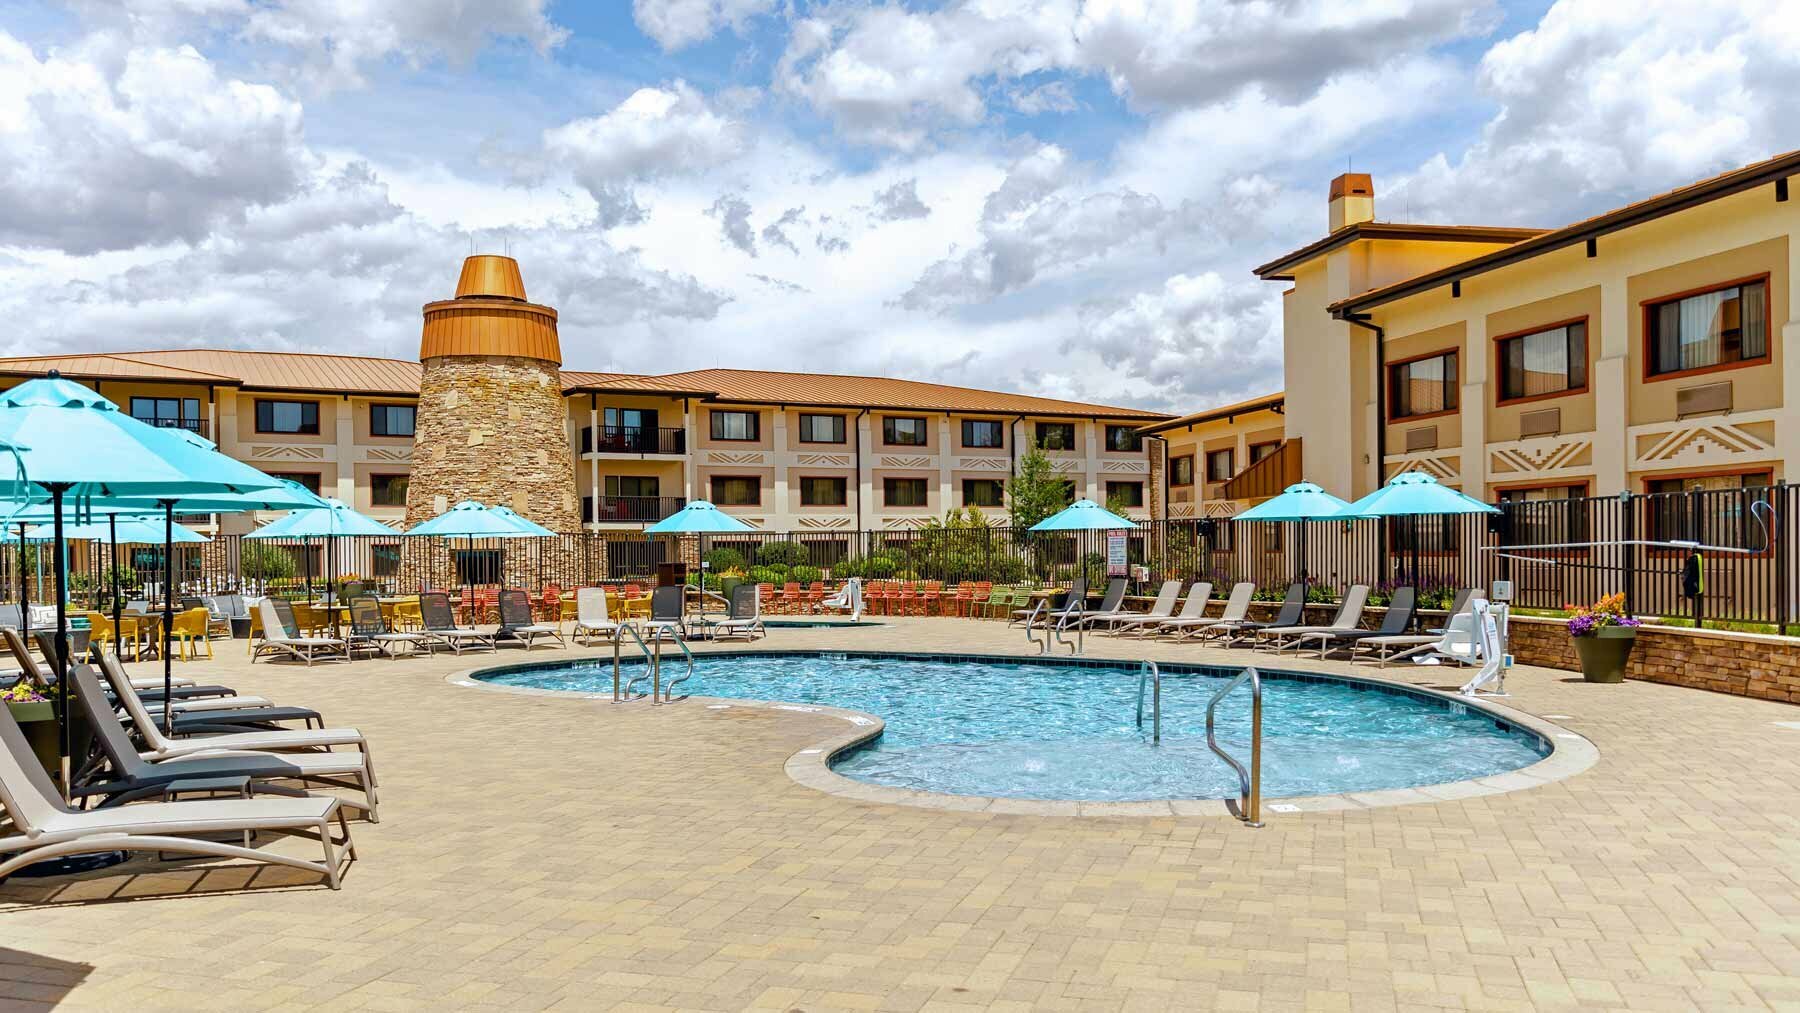 Photo of Squire Resort at the Grand Canyon, Flagstaff, AZ